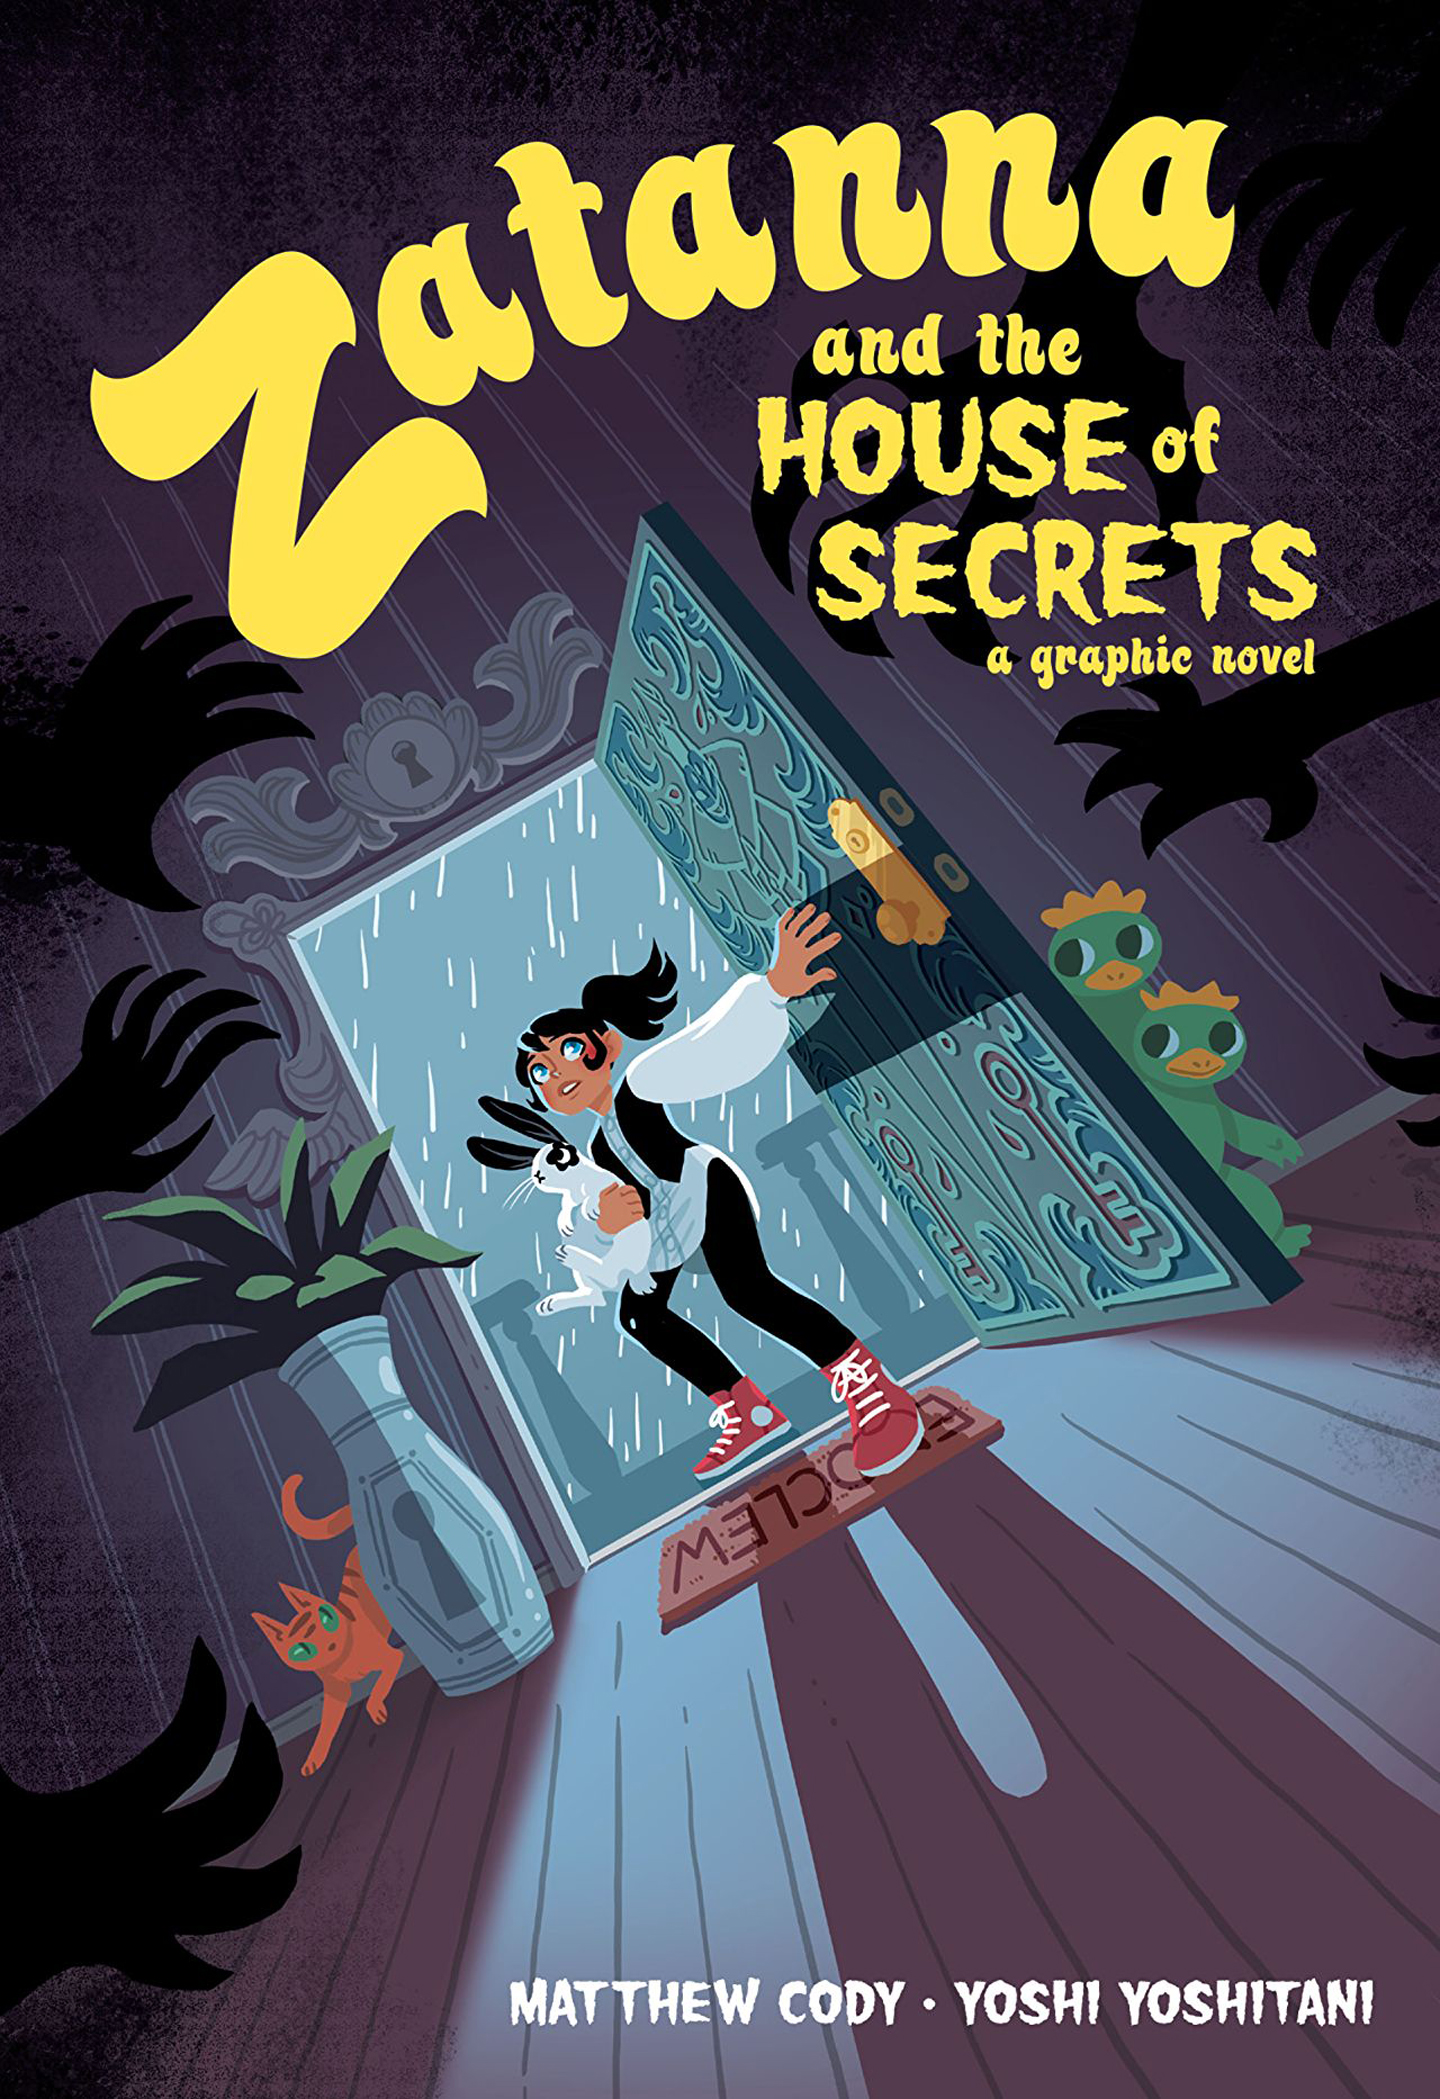 Read online Zatanna and the House of Secrets comic -  Issue # TPB (Part 1) - 1